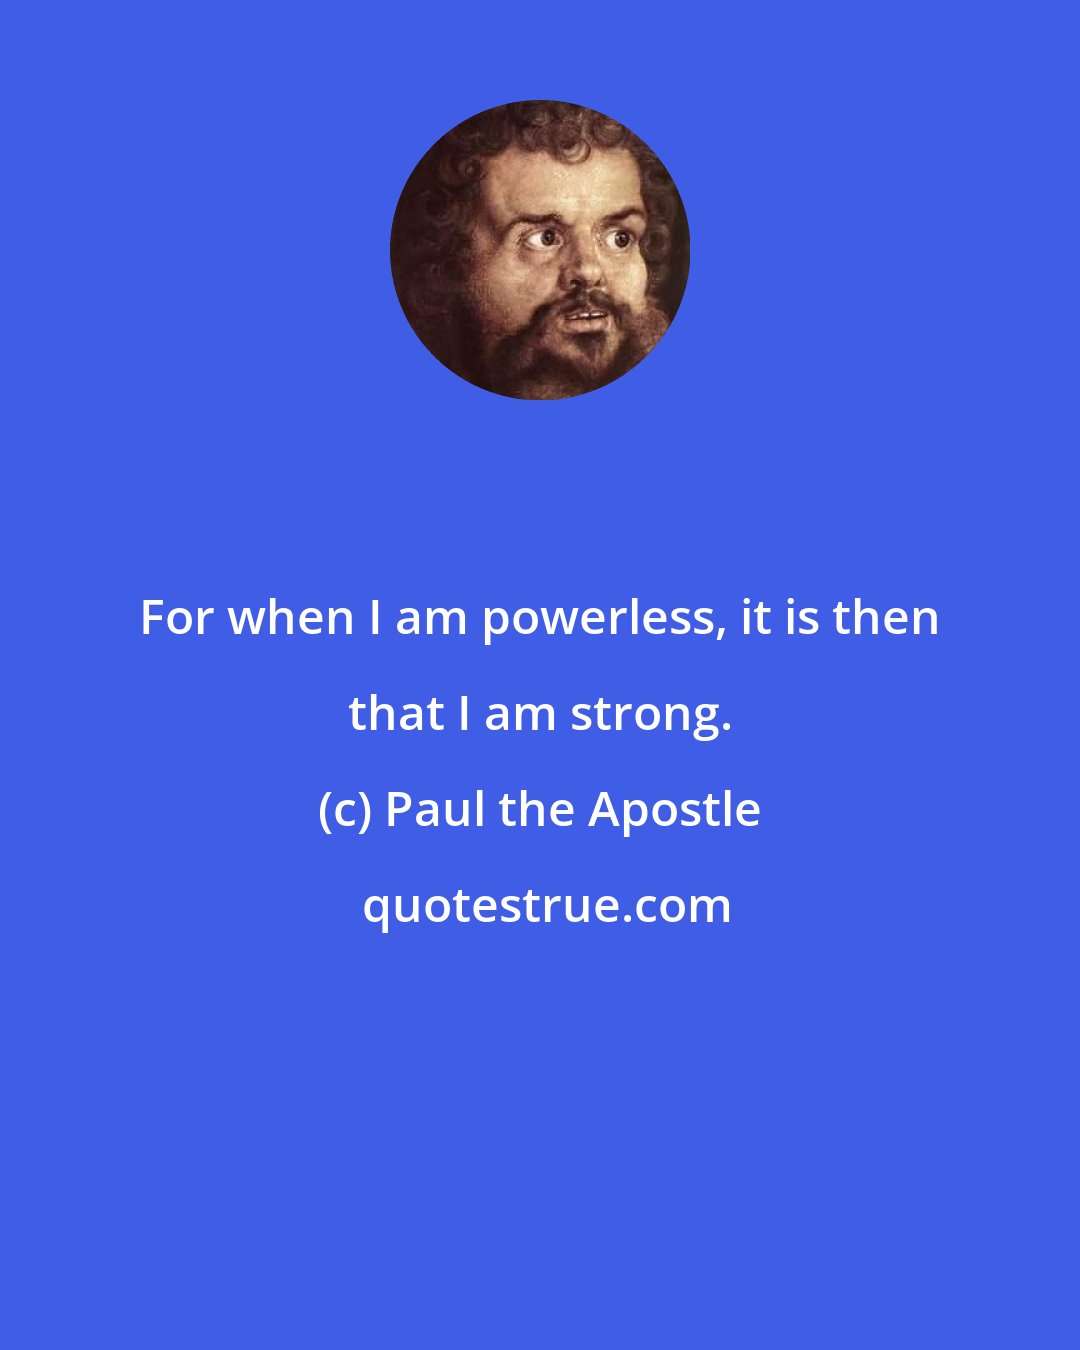 Paul the Apostle: For when I am powerless, it is then that I am strong.